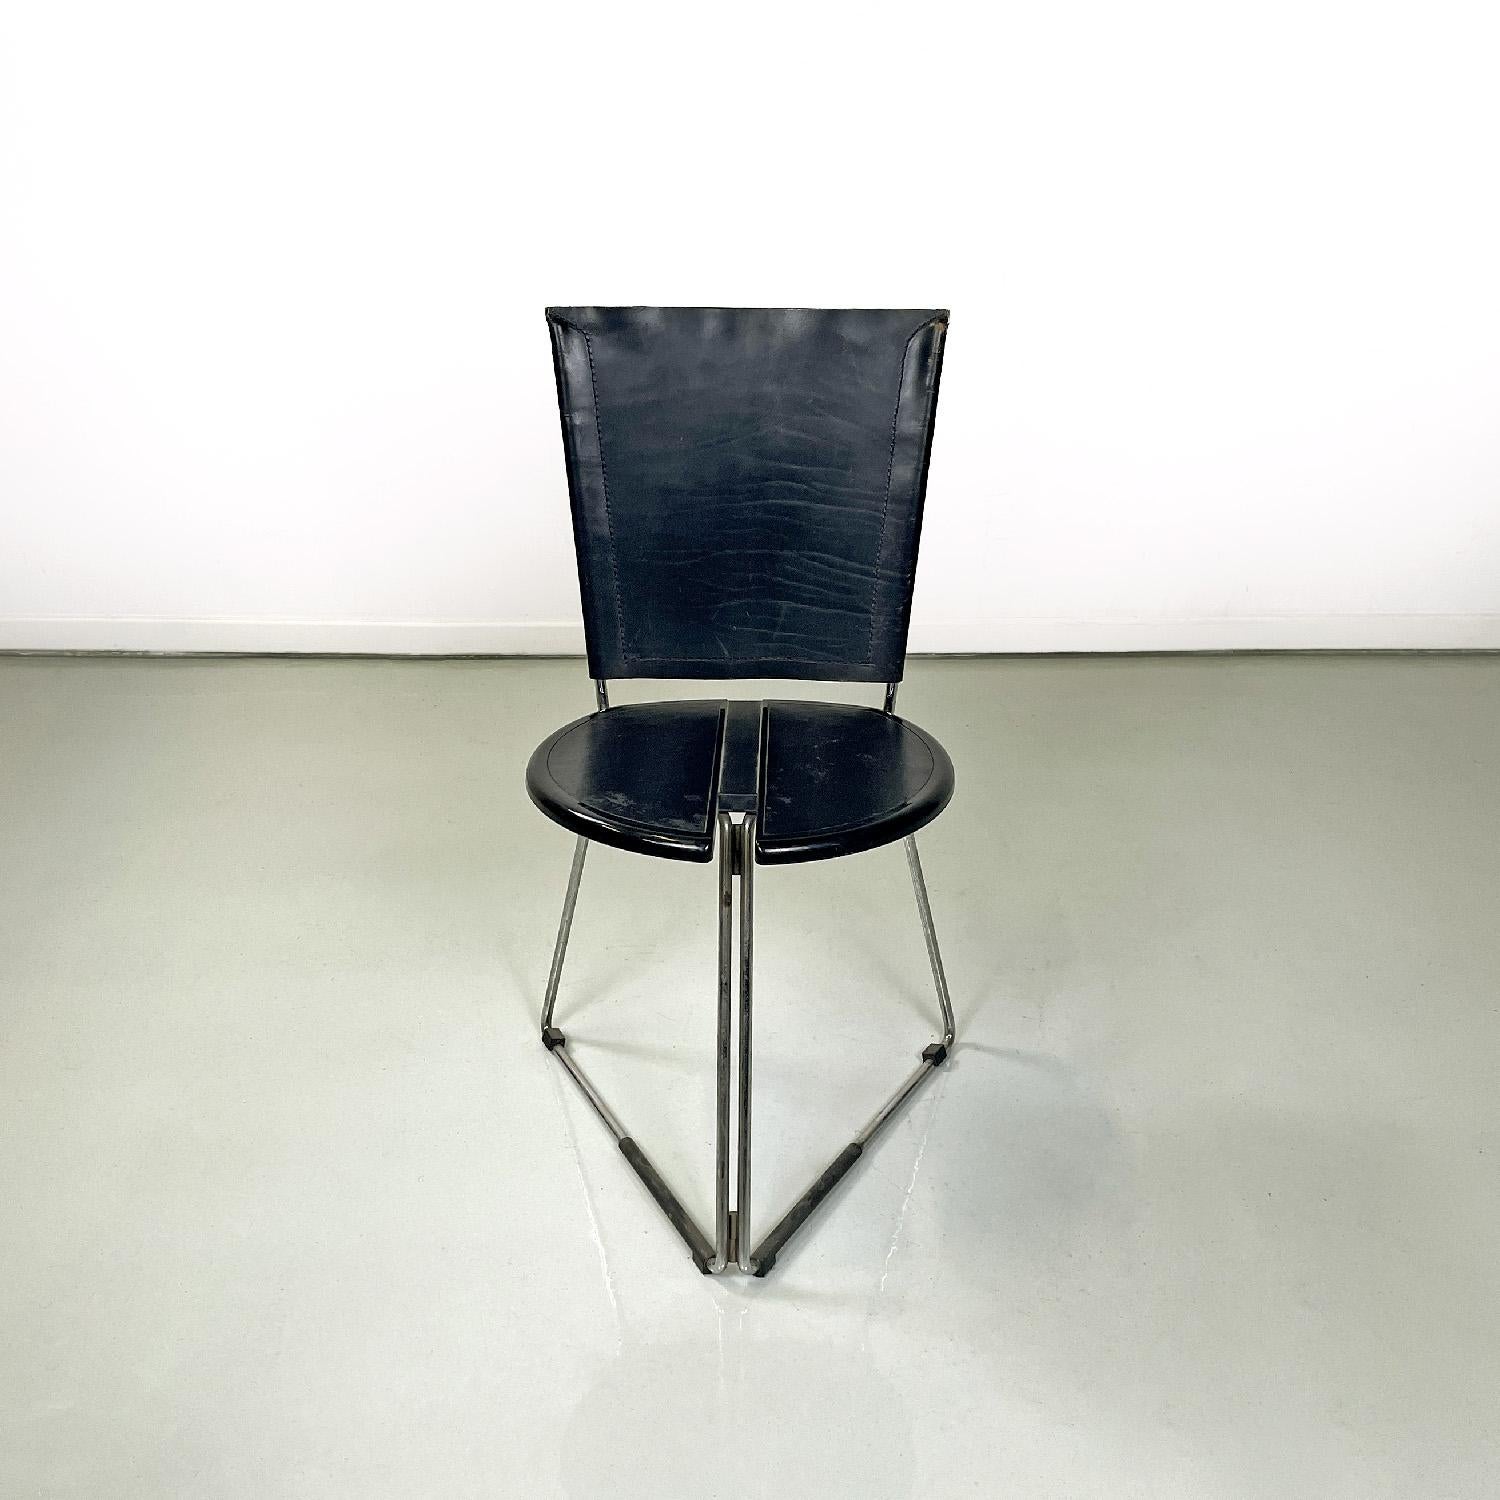 Italian modern black chair Terna by Gaspare Cairoli for Seccose, 1980s In Good Condition For Sale In MIlano, IT